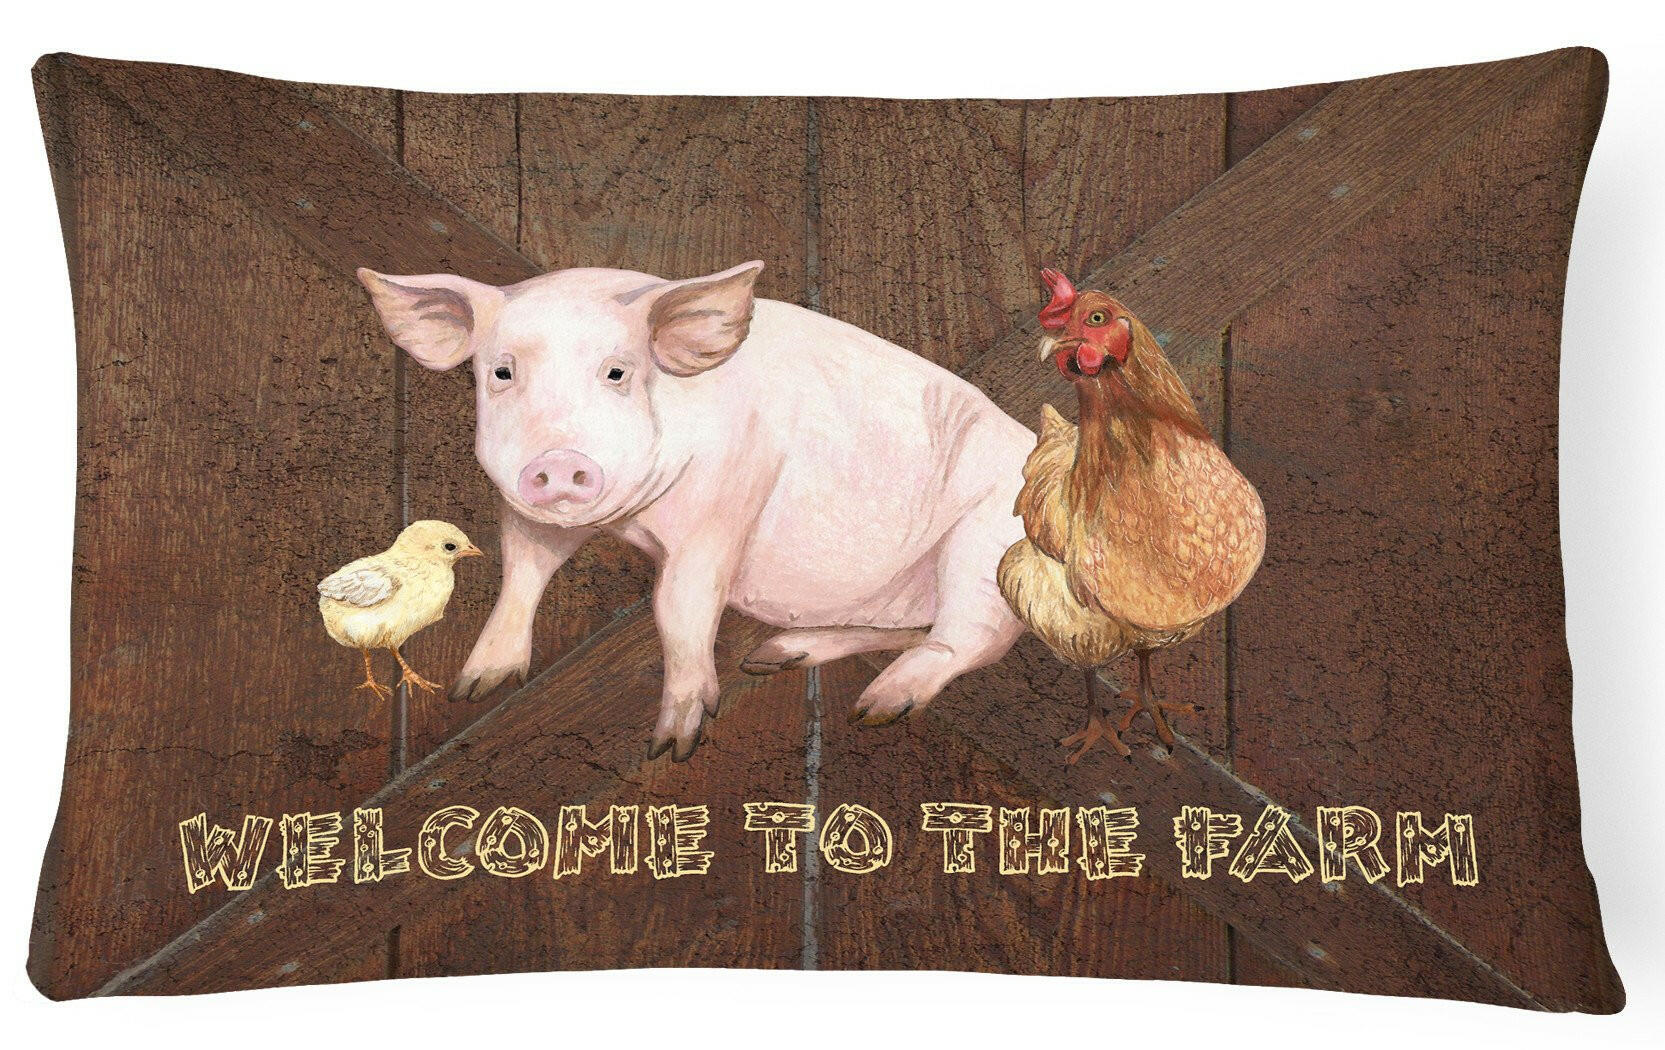 Welcome to the Farm with the pig and chicken   Canvas Fabric Decorative Pillow SB3083PW1216 by Caroline's Treasures